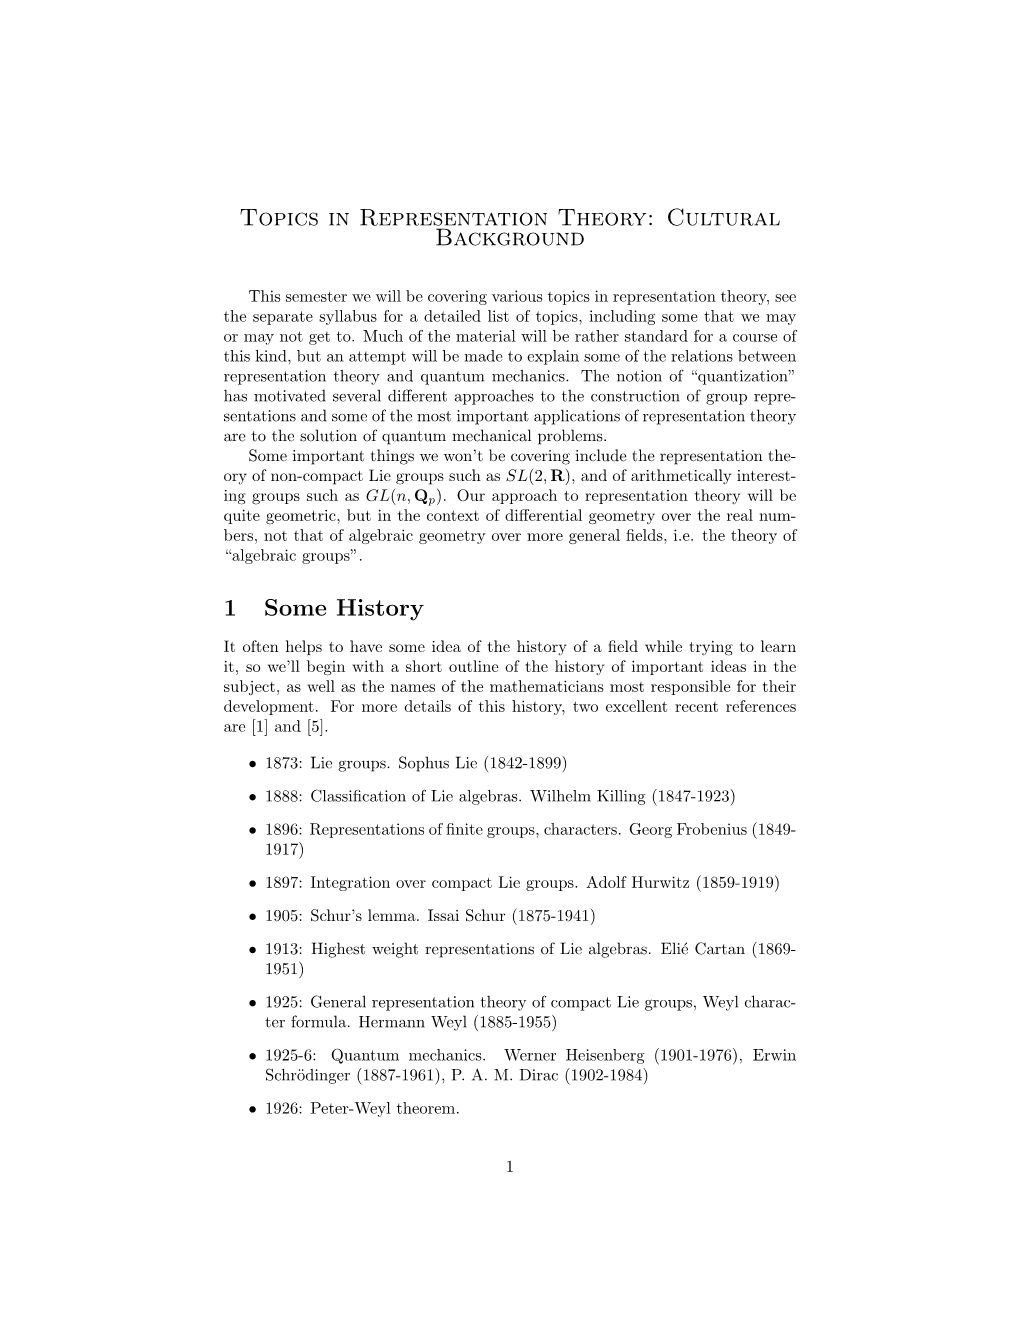 Topics in Representation Theory: Cultural Background 1 Some History